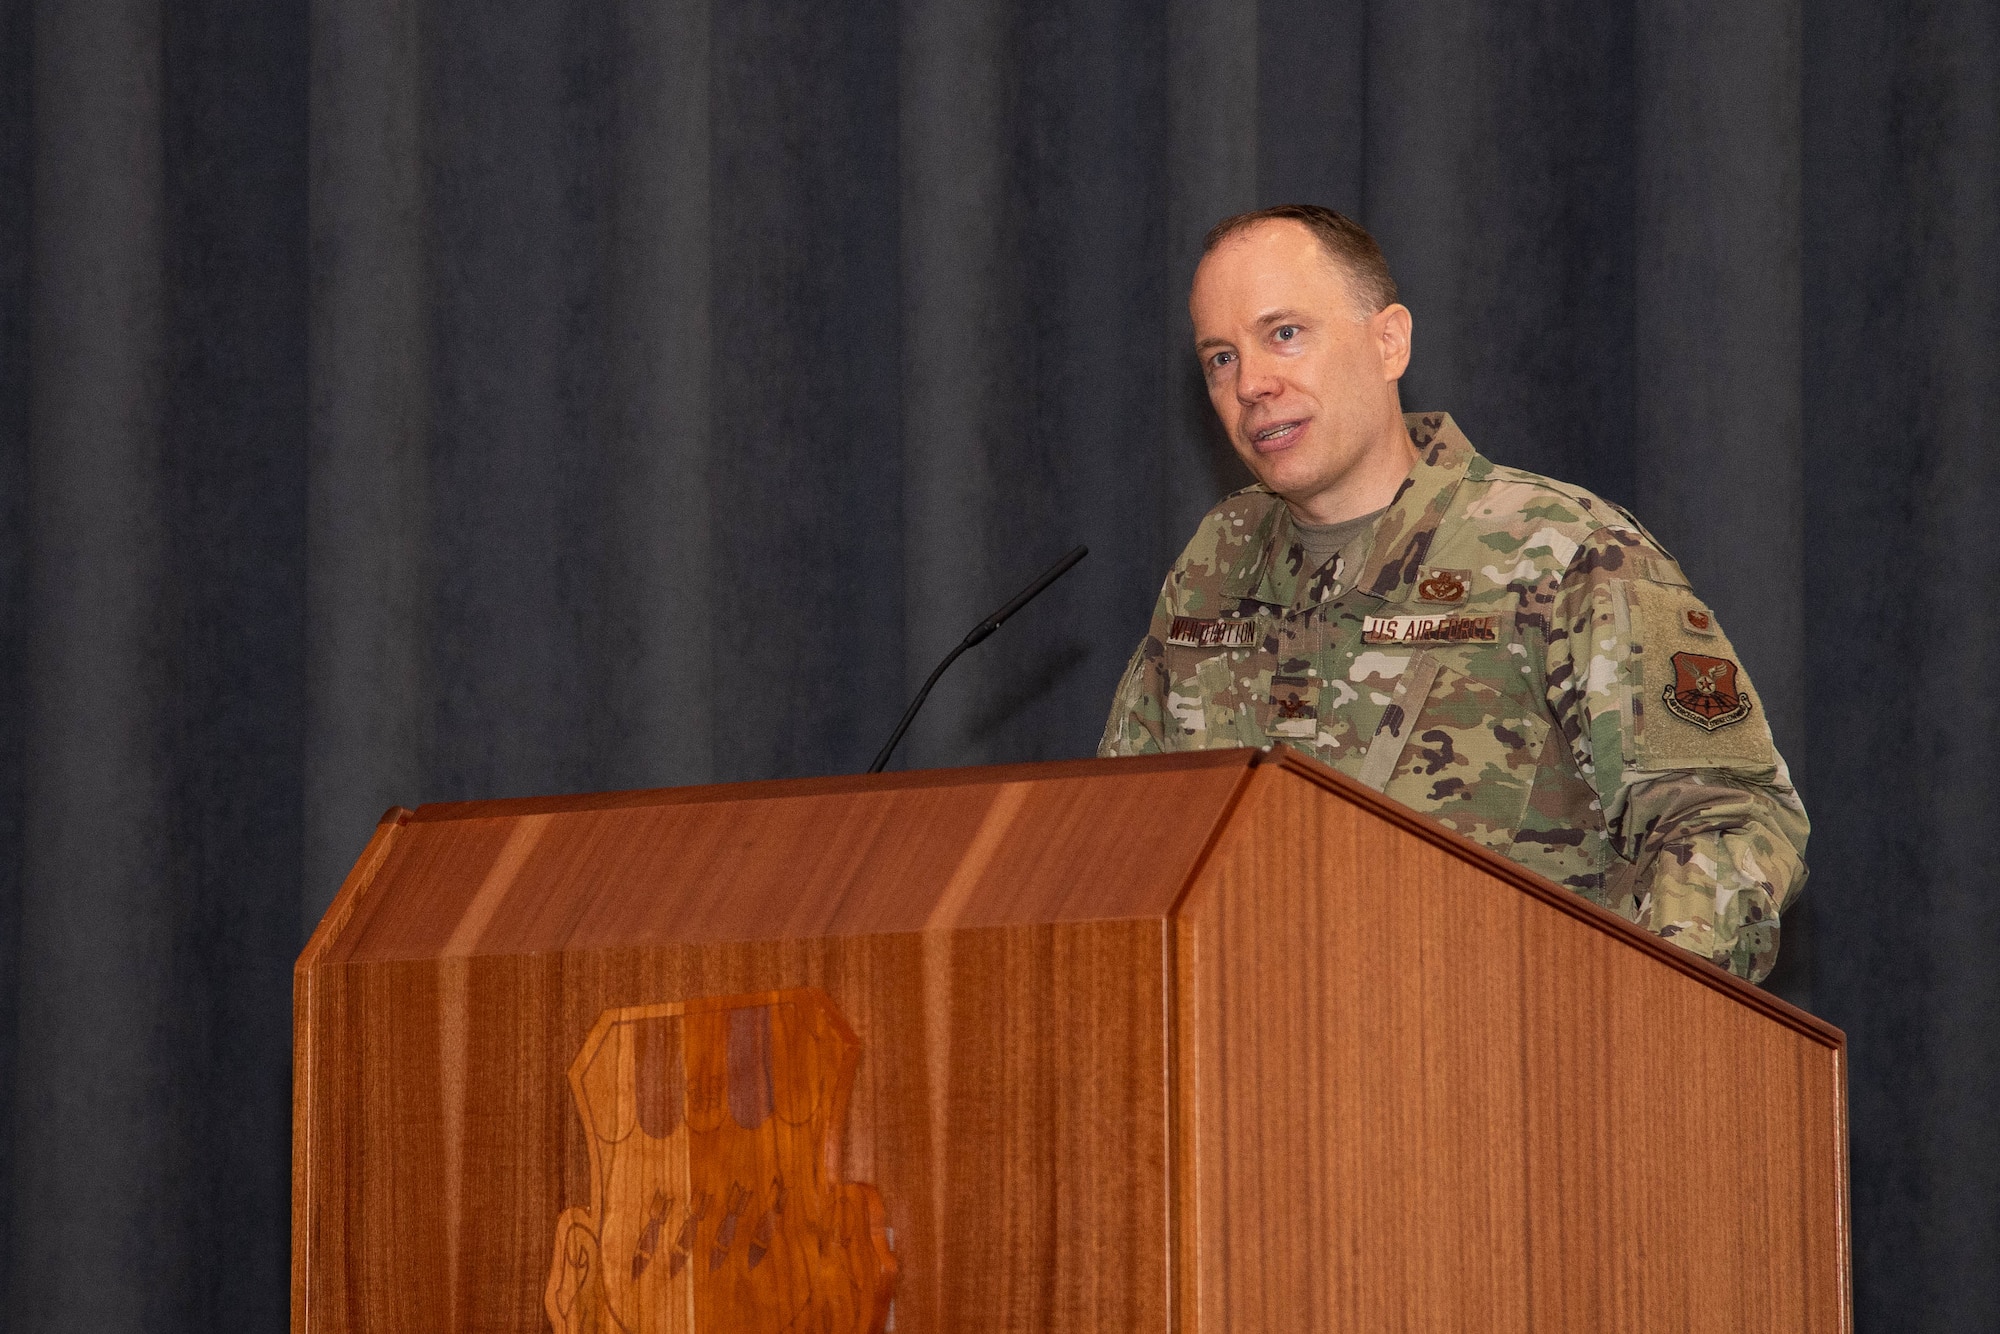 2nd MSG welcomes new commander